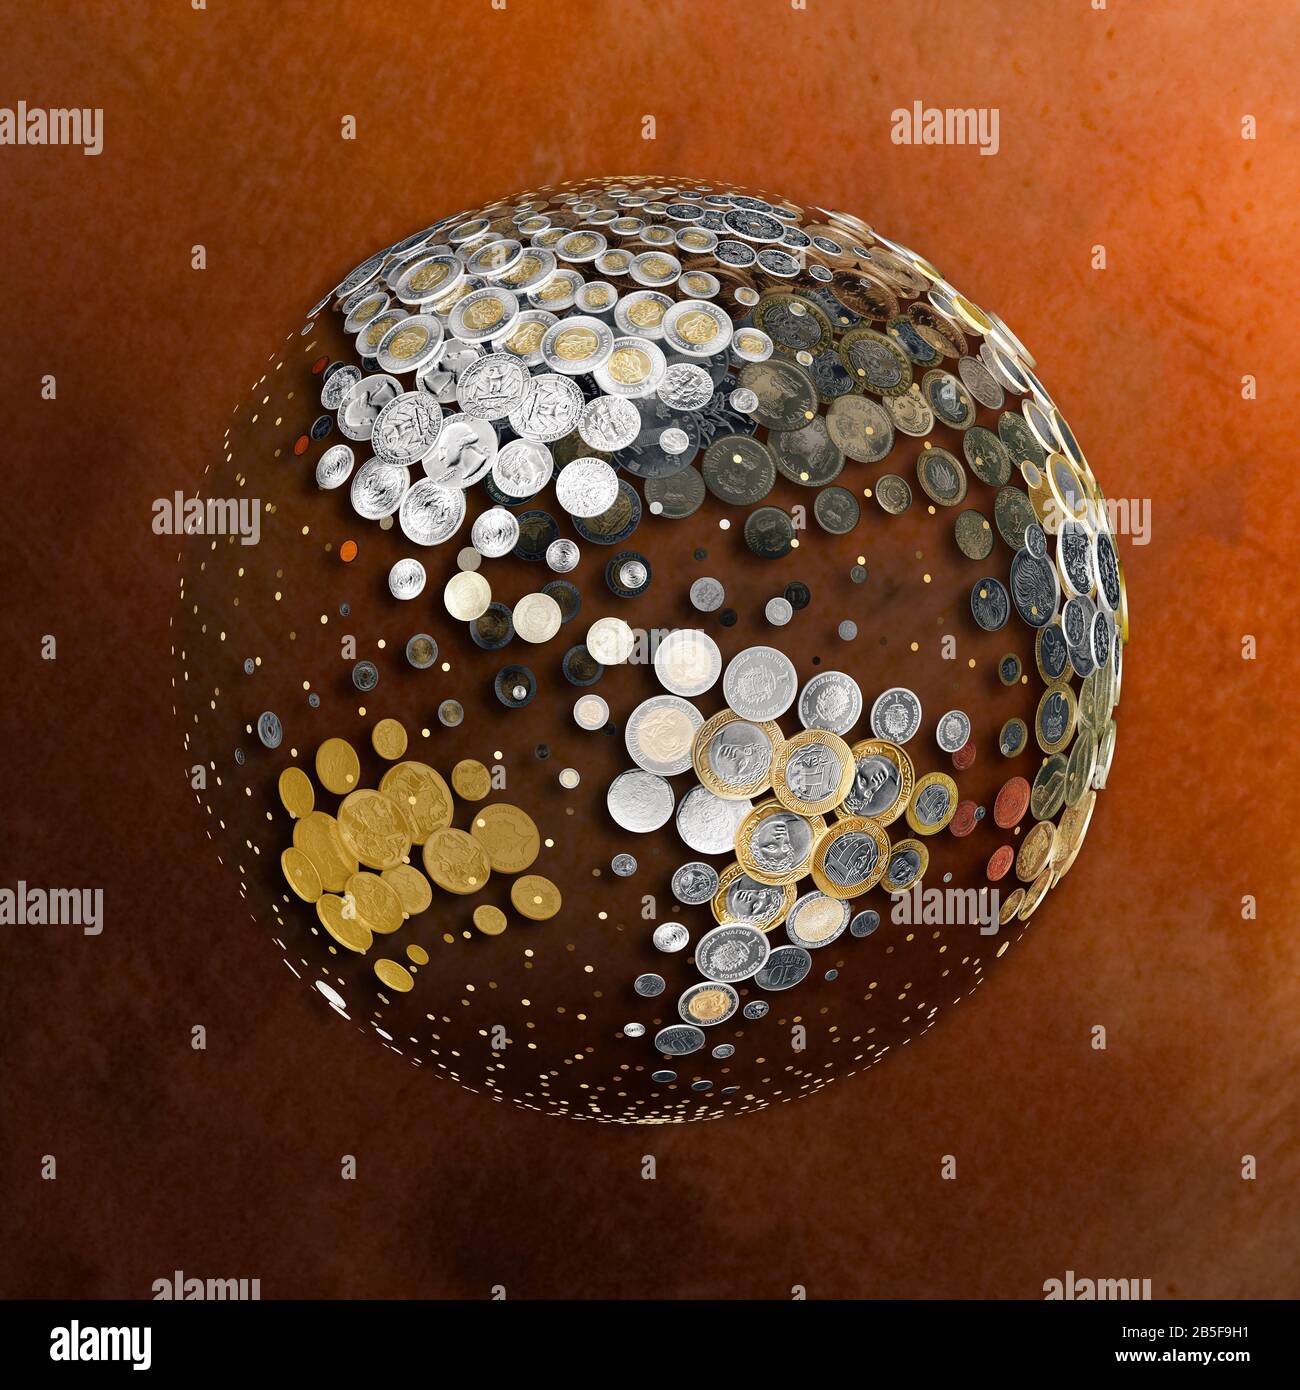 Globe of coins. International currency. World economy. Finance. Copper background. Stock Photo